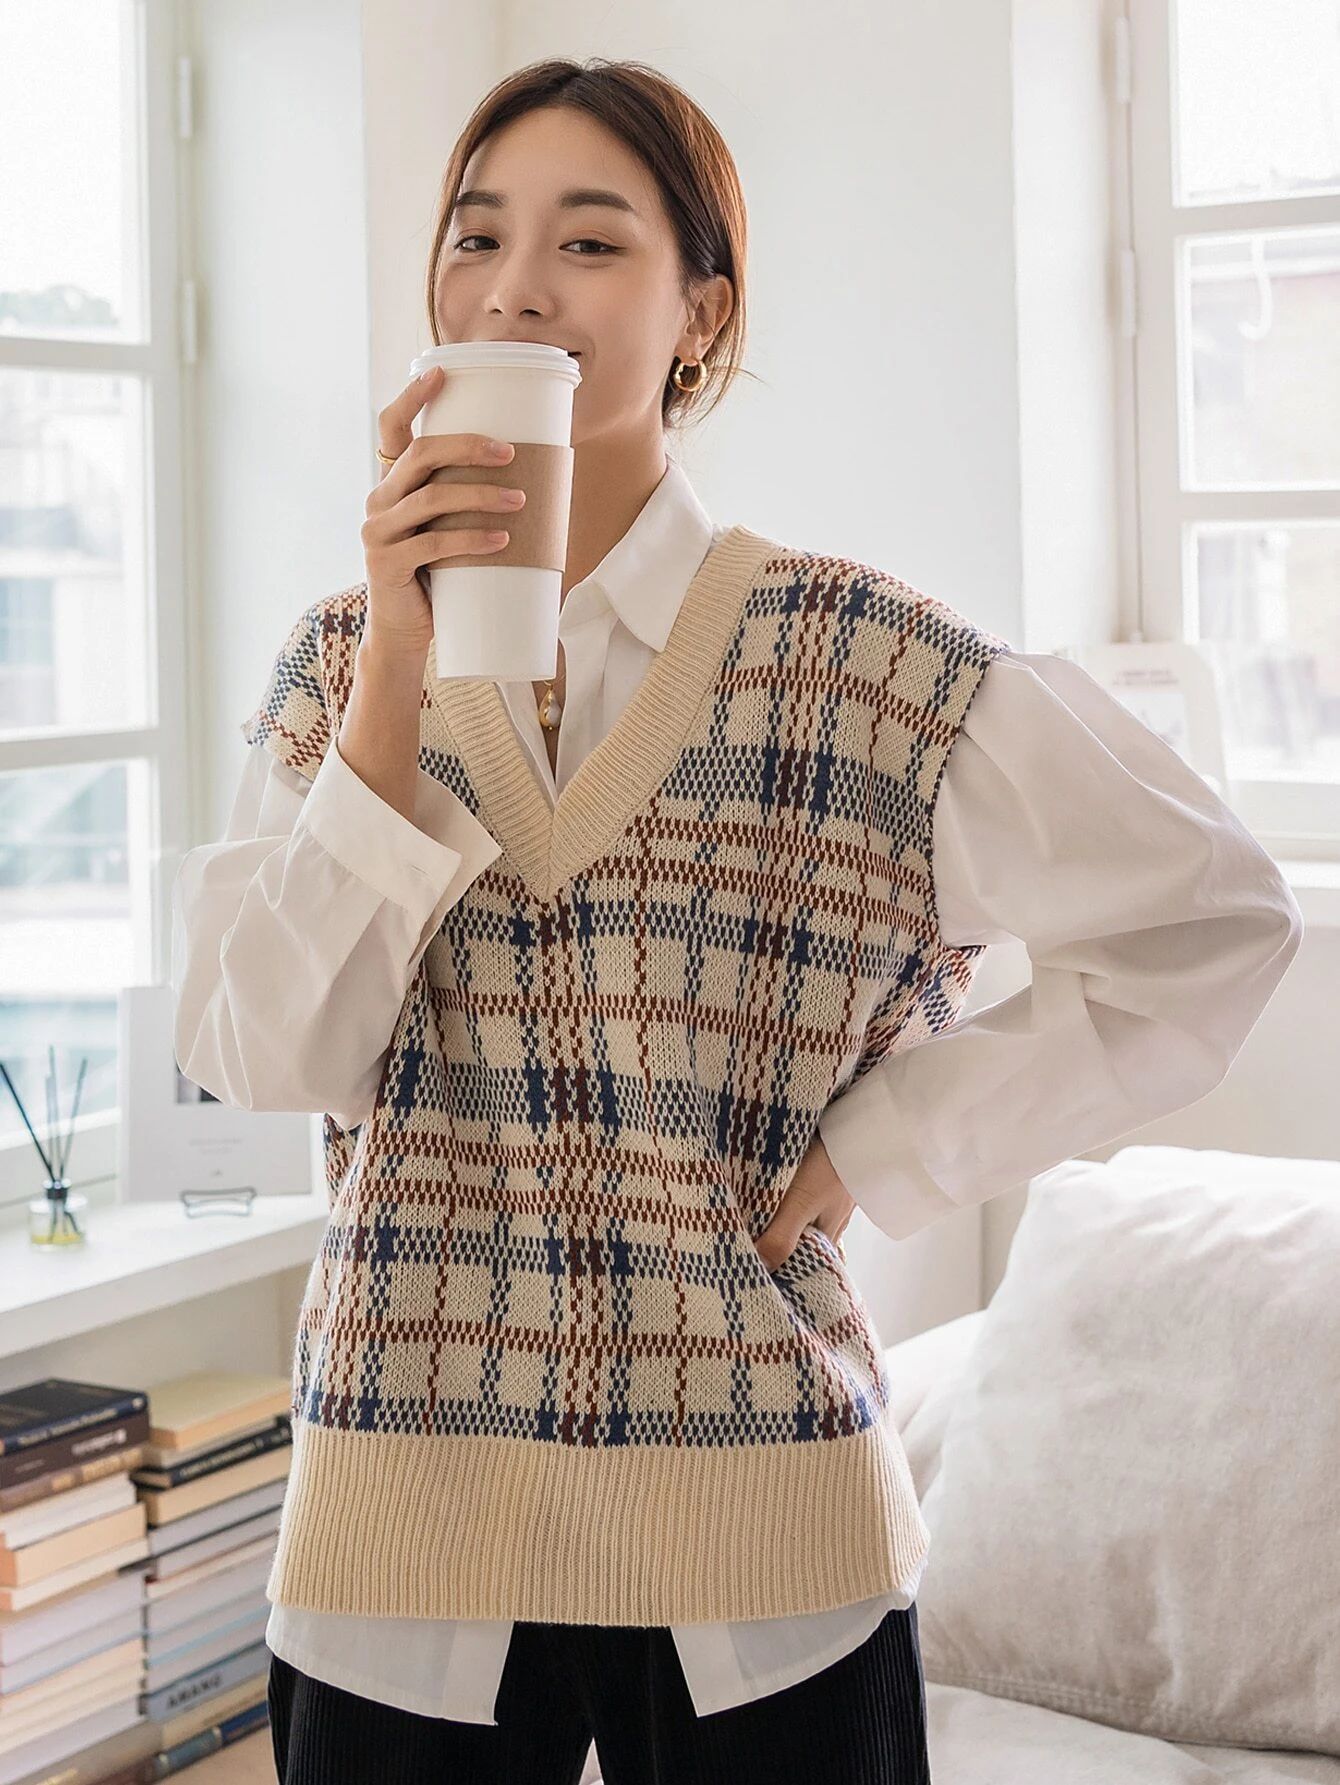 DAZY Plaid Pattern Sweater Vest Without Blouse | SHEIN